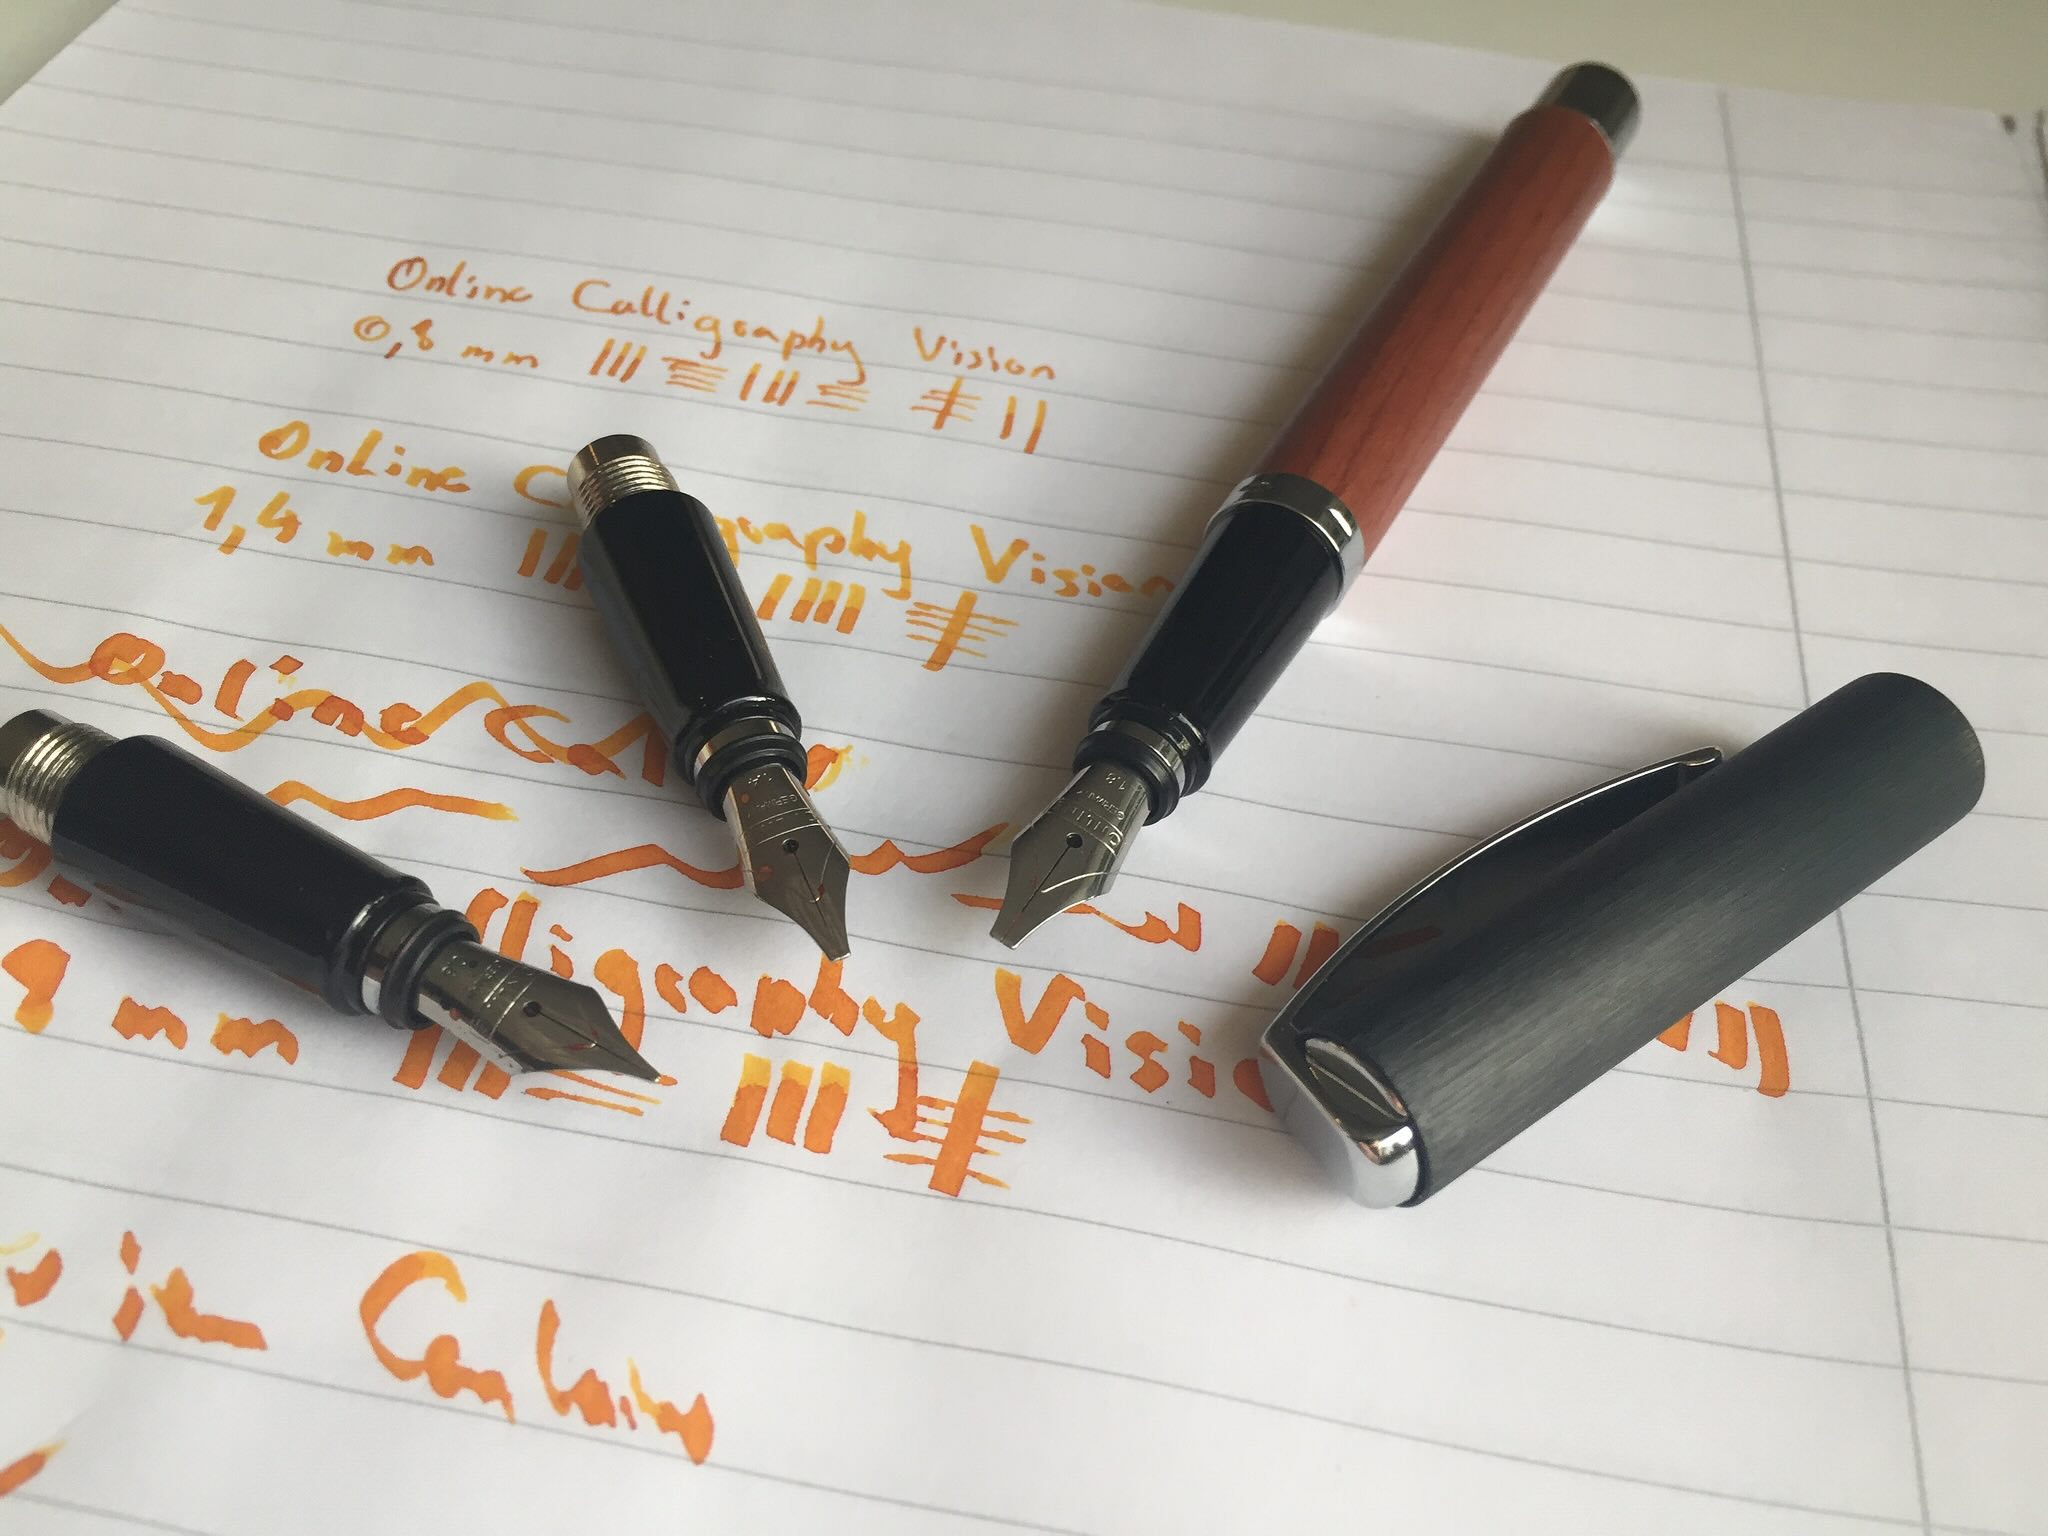 Review: Calligraphy Set - The Perfect Tool for Elegant Writing